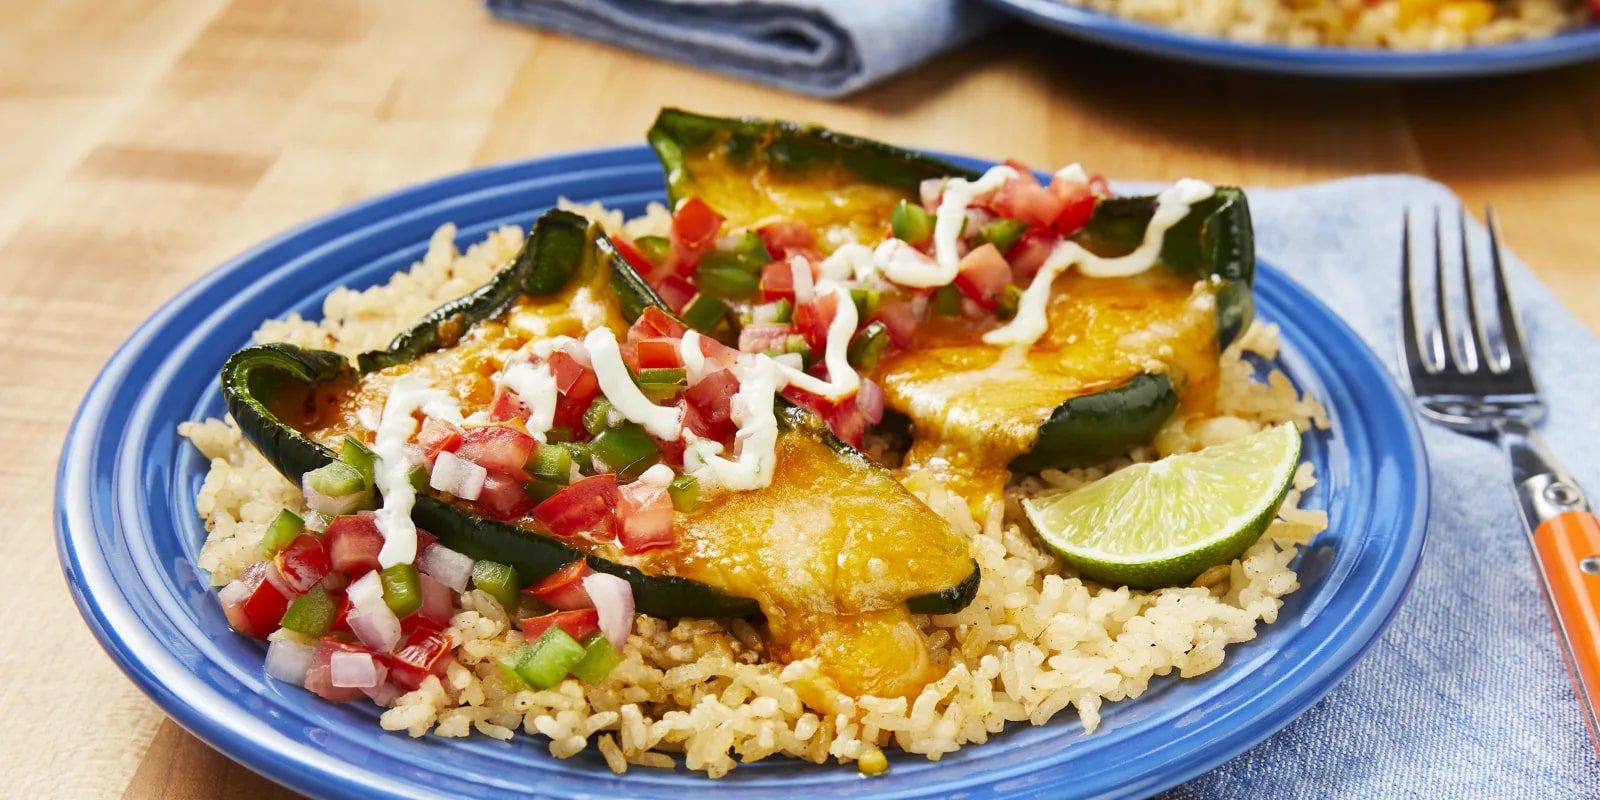 Cheesy Stuffed Green Peppers with Pico de Gallo, Spiced Rice, and Zesty Crema